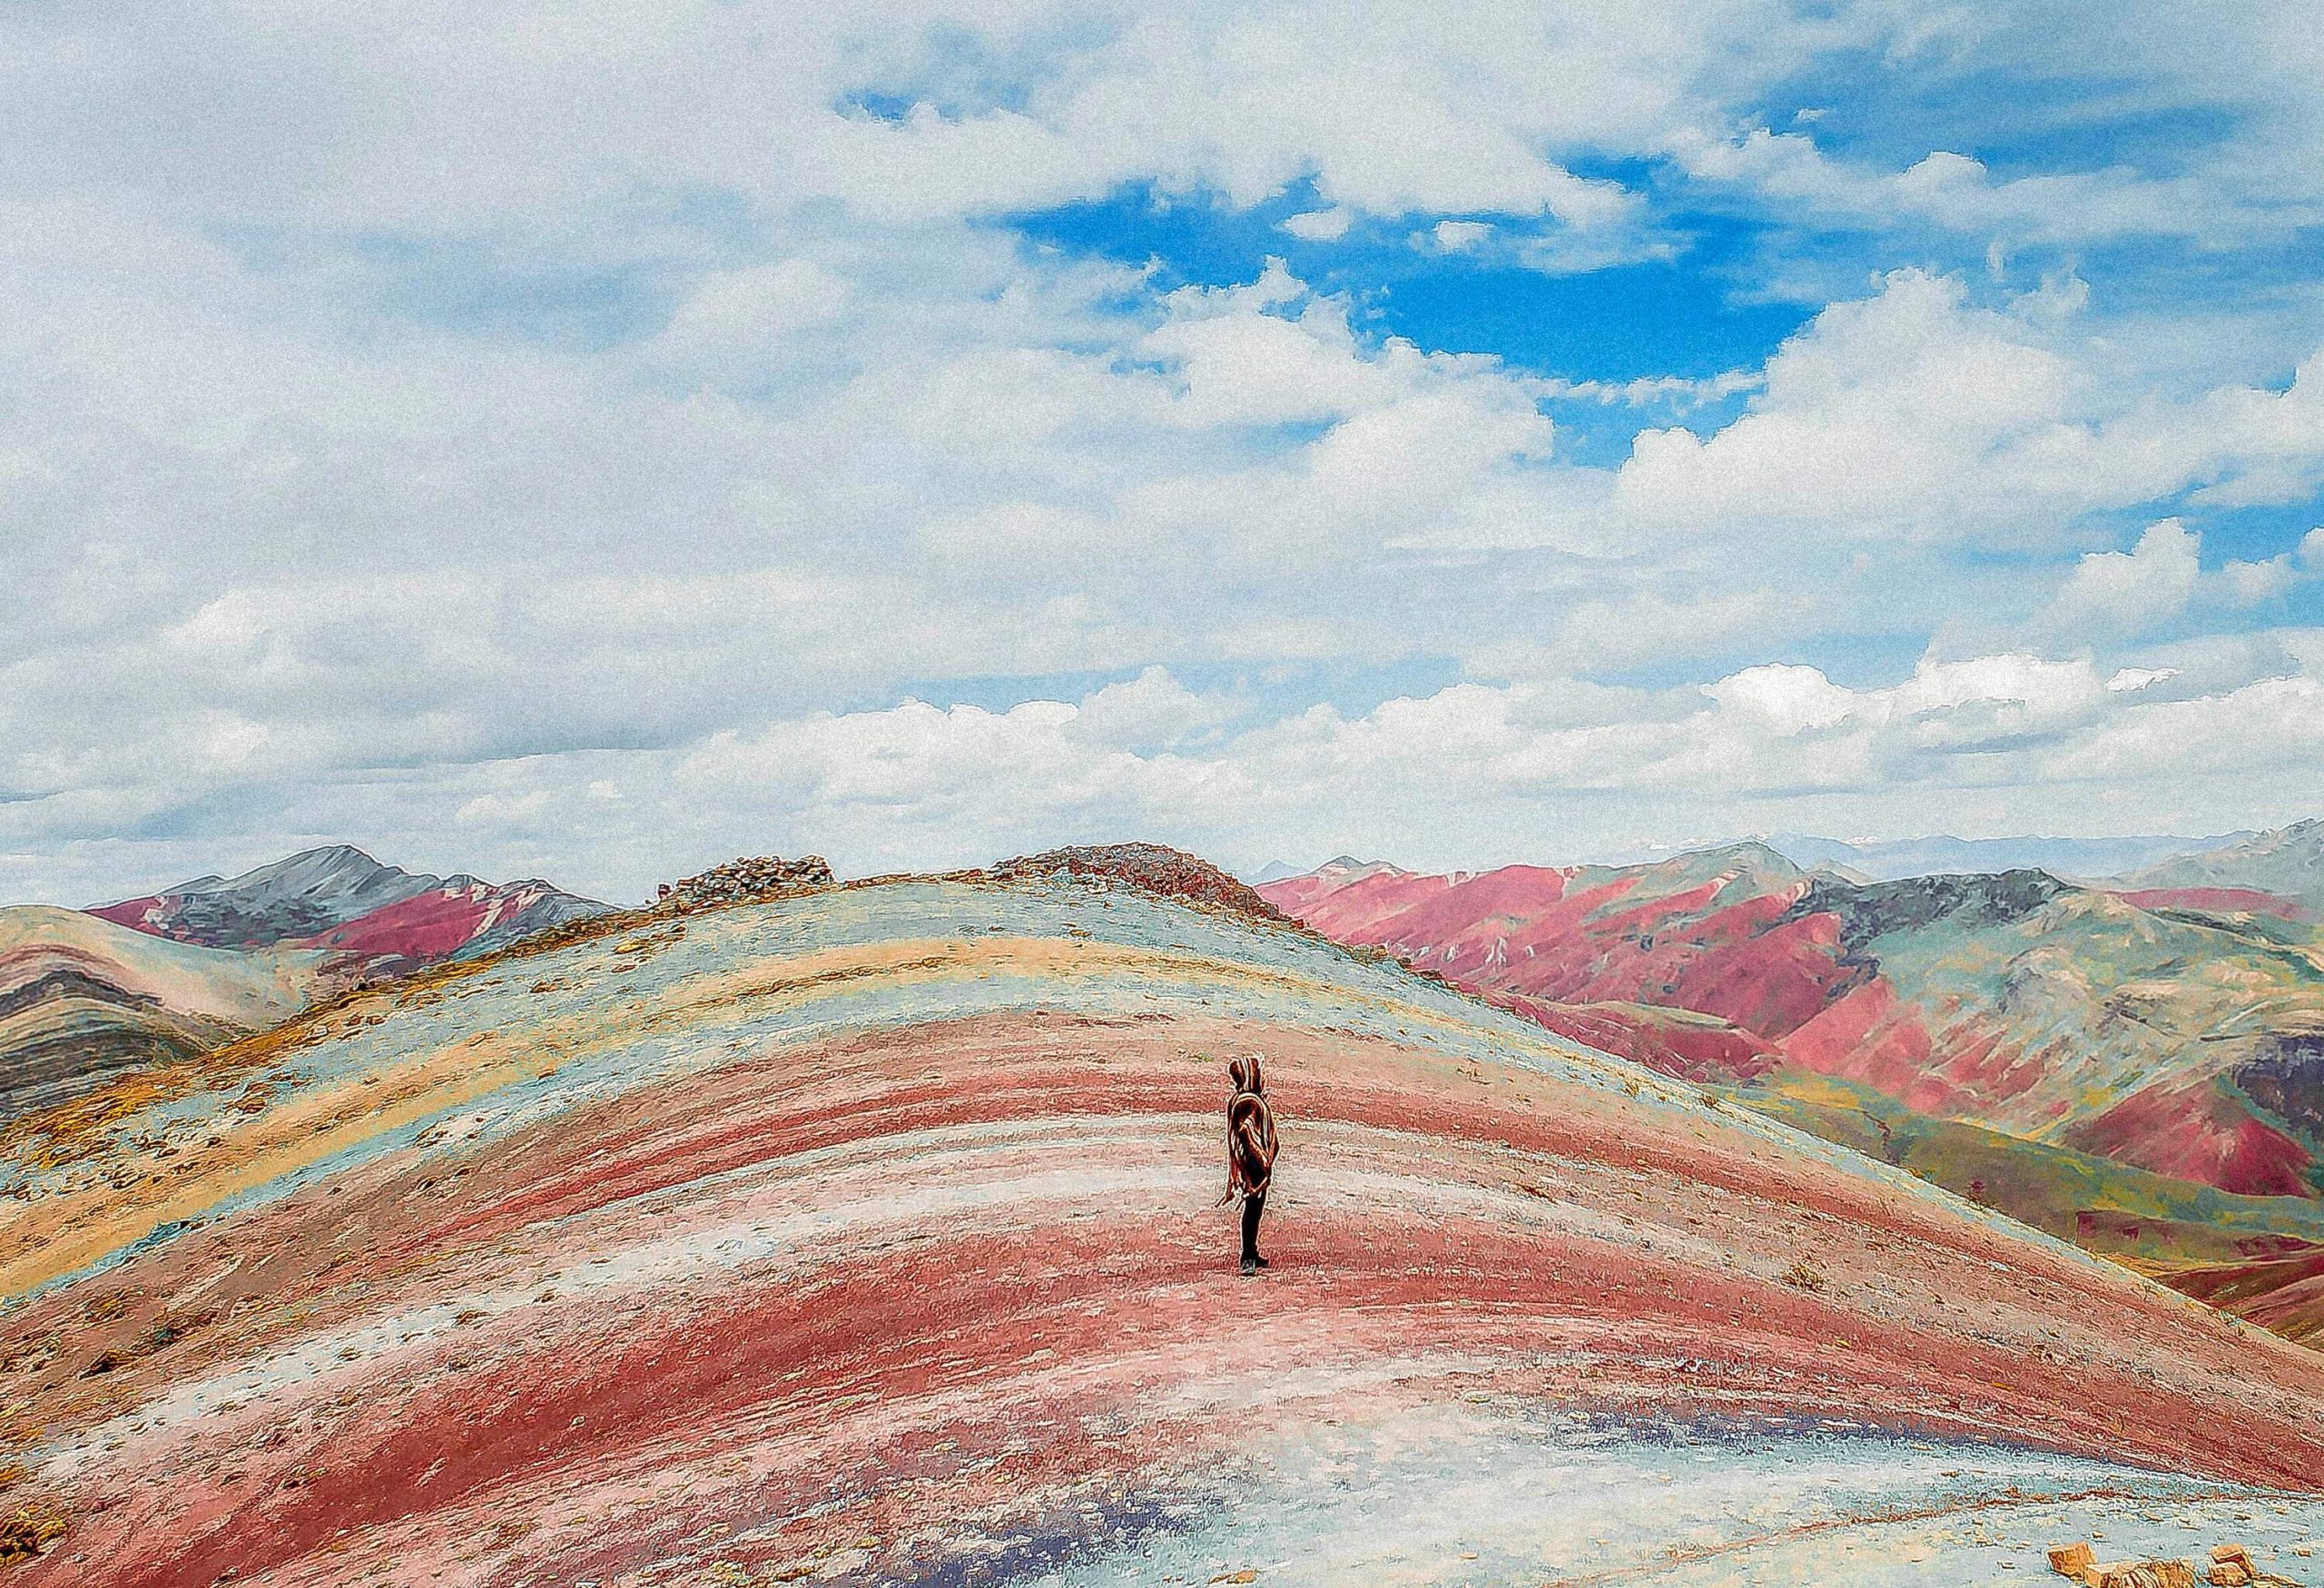 A tourist standing atop a spectacular rainbow-striped hill against the white cloudy sky.